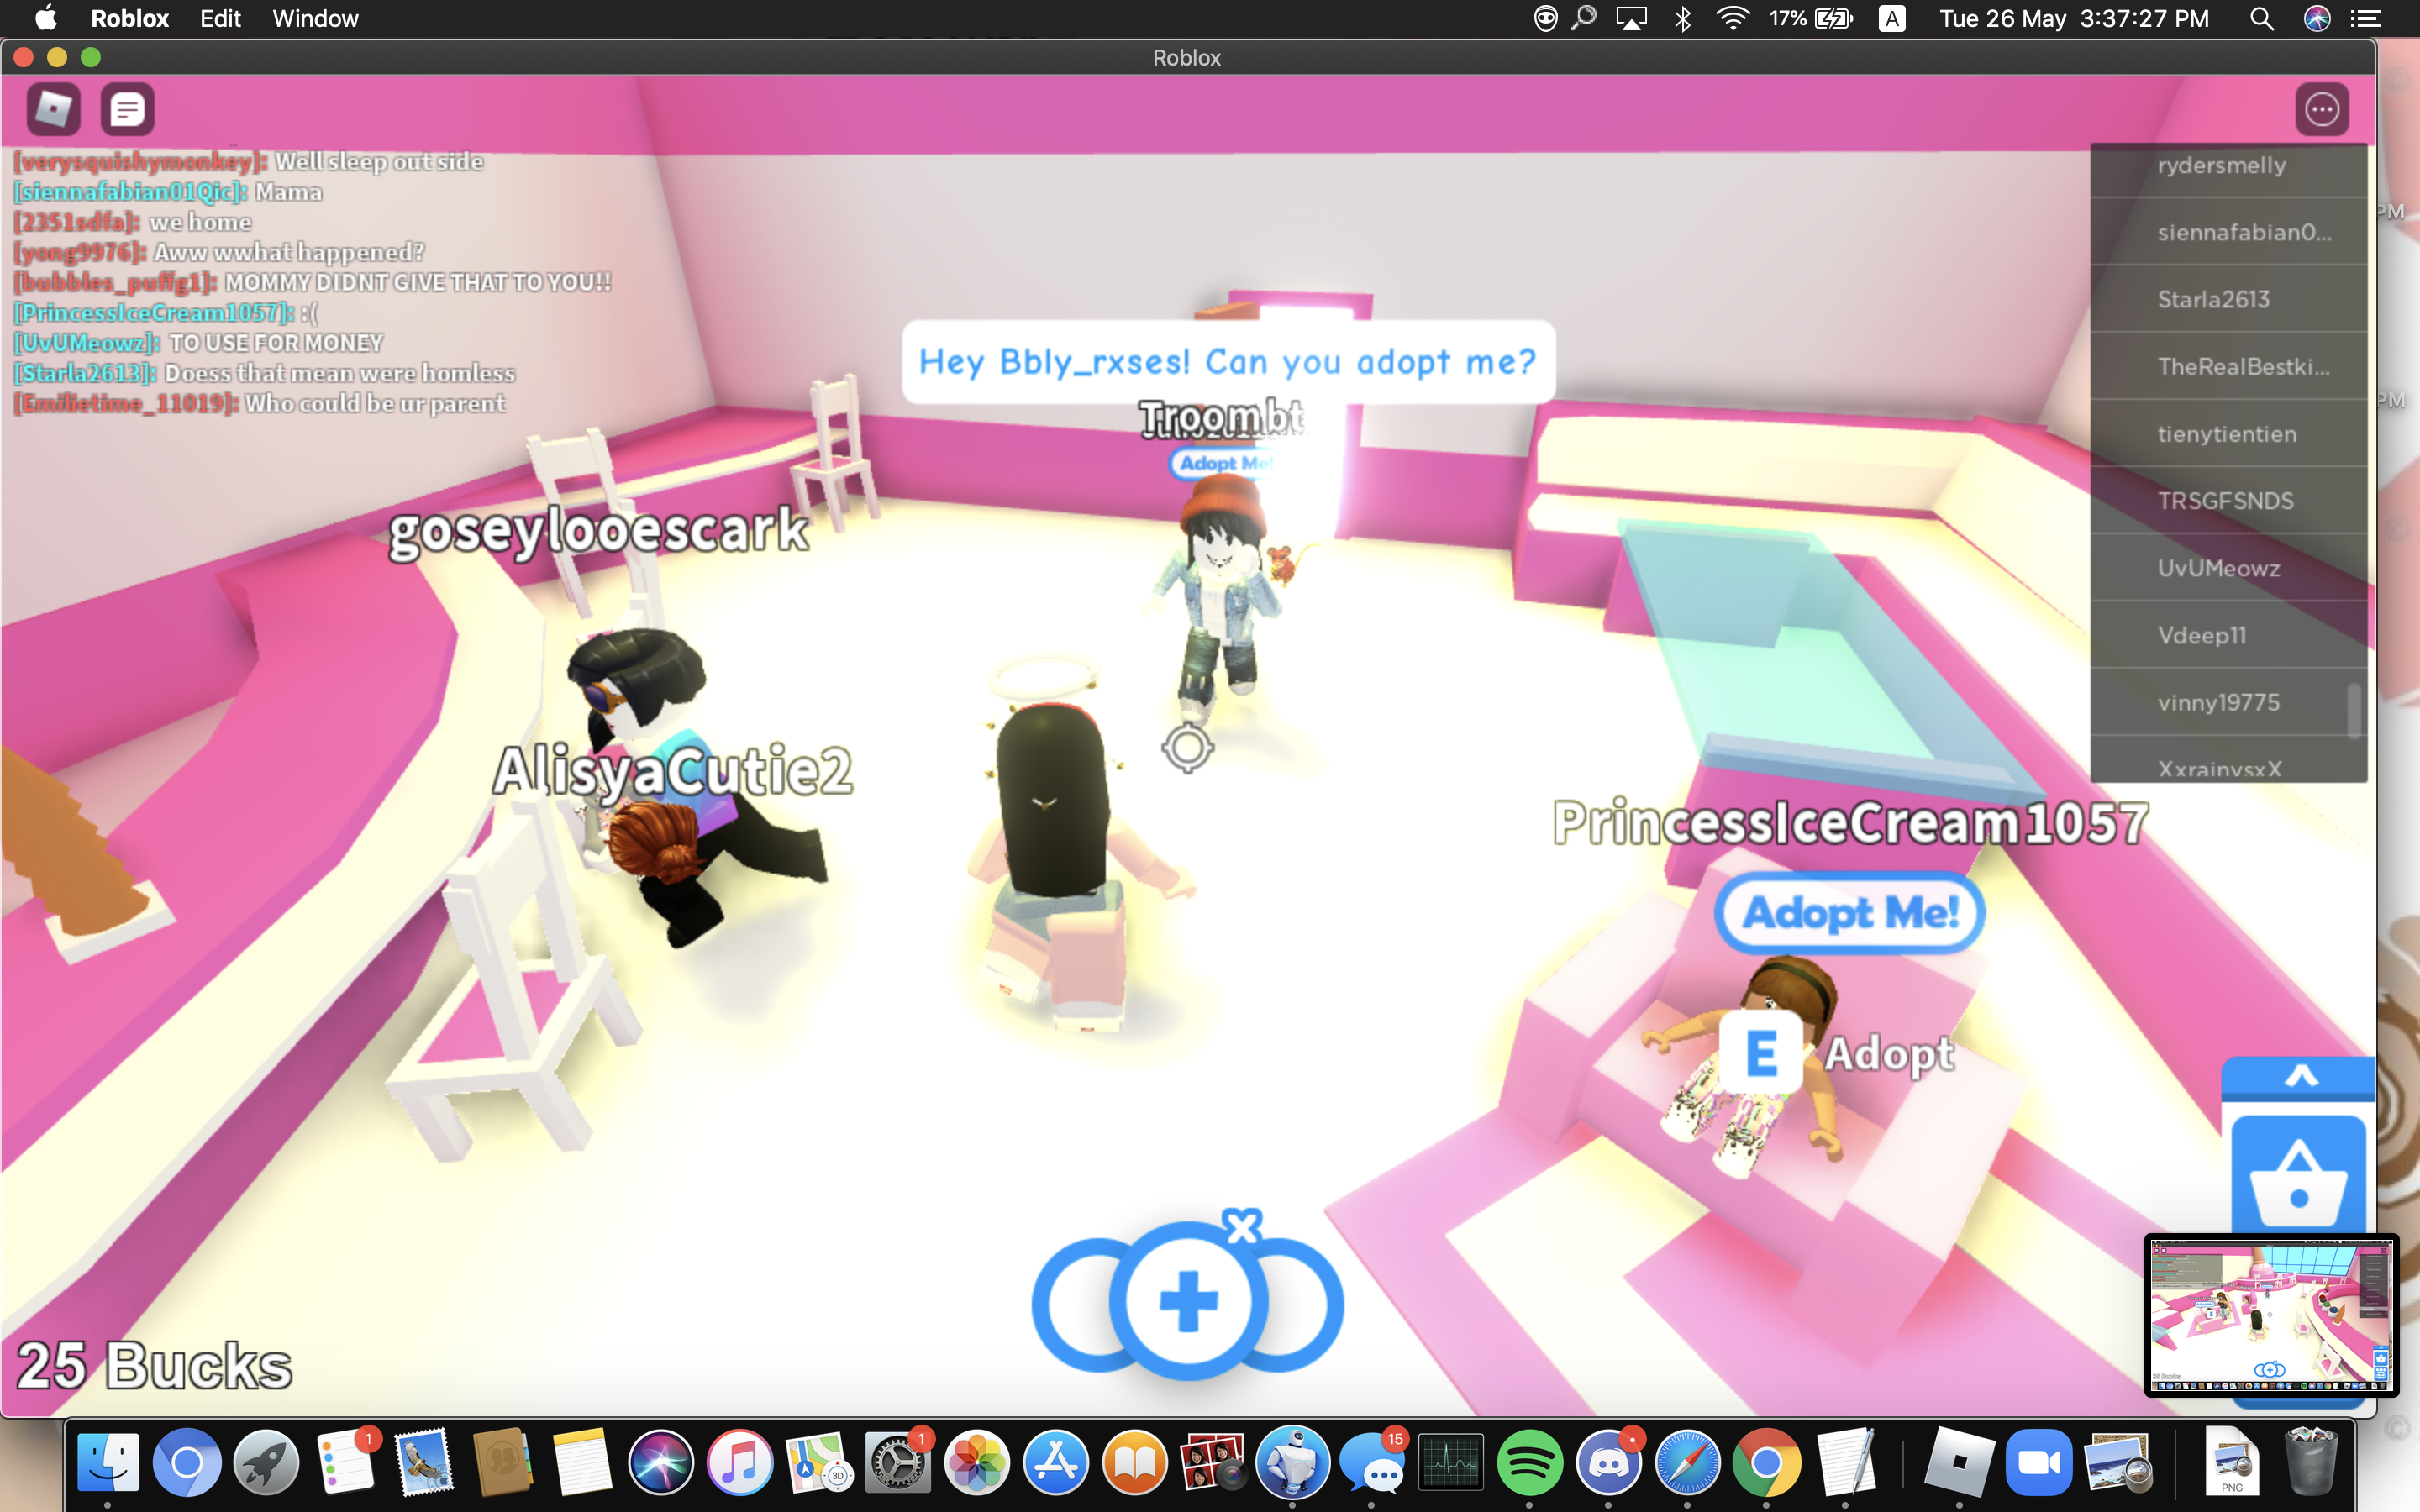 Went And Played Adopt Me Legacy D Link Below Fandom - https web roblox home